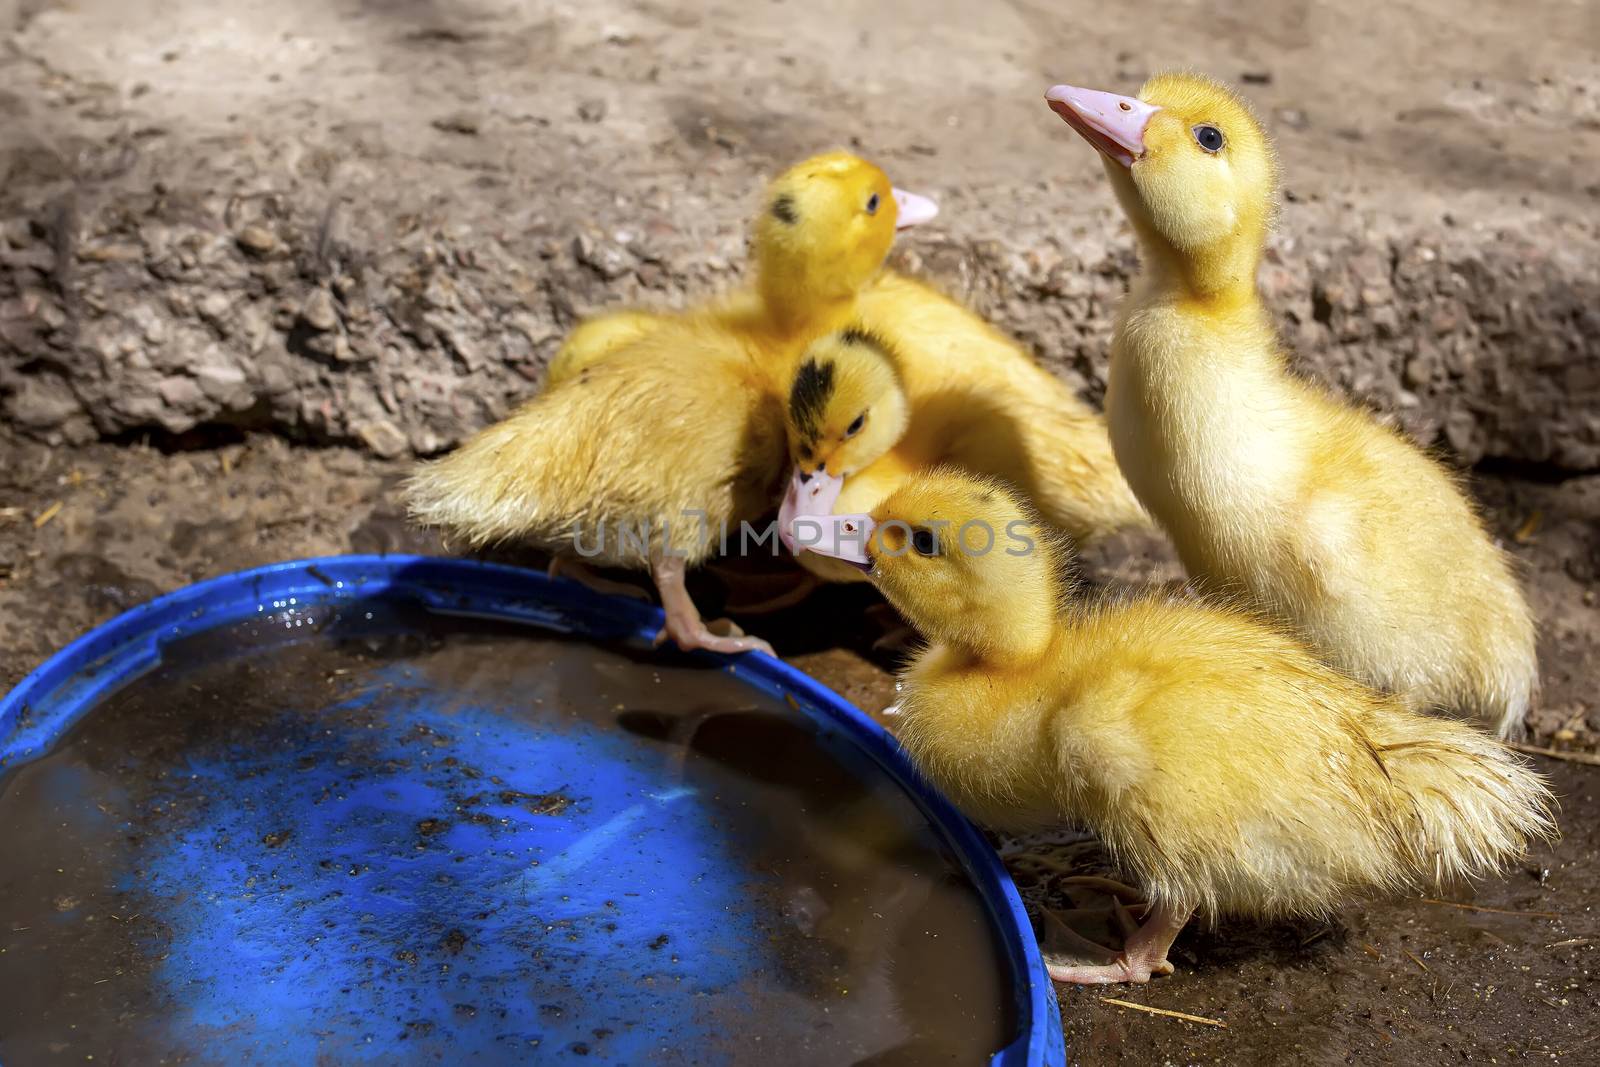 A group of ducklings. Growing poultry at home. by 977_ReX_977